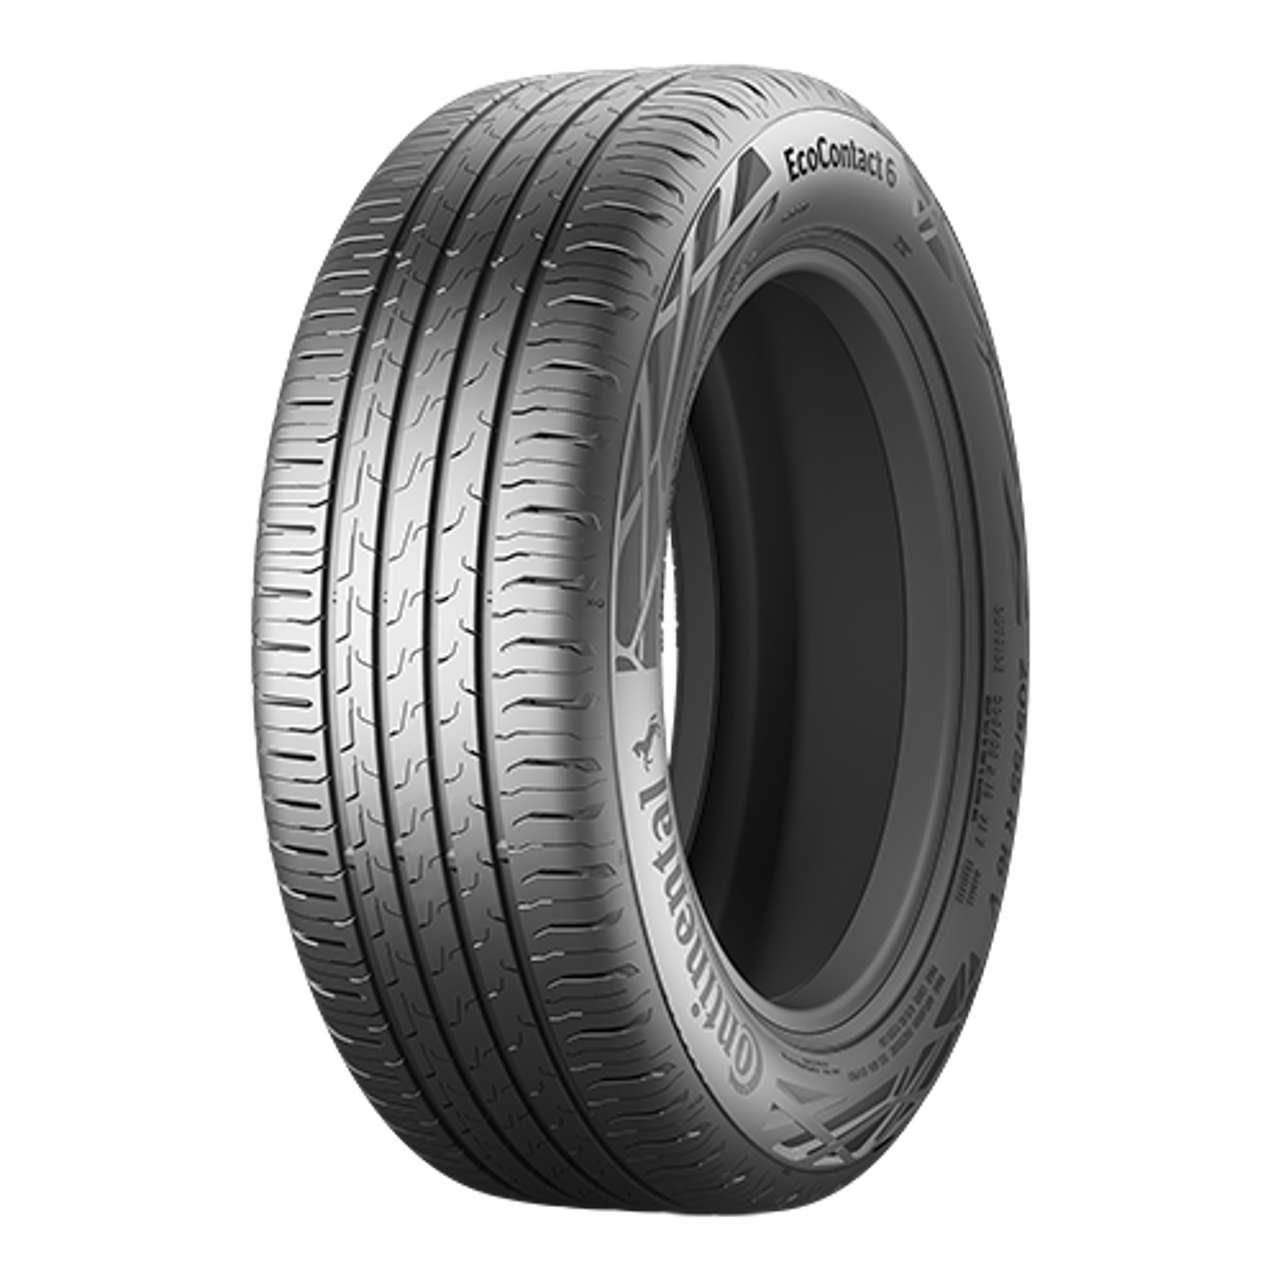 CONTINENTAL ECOCONTACT 6 (EVc) 195/65R15 95H BSW